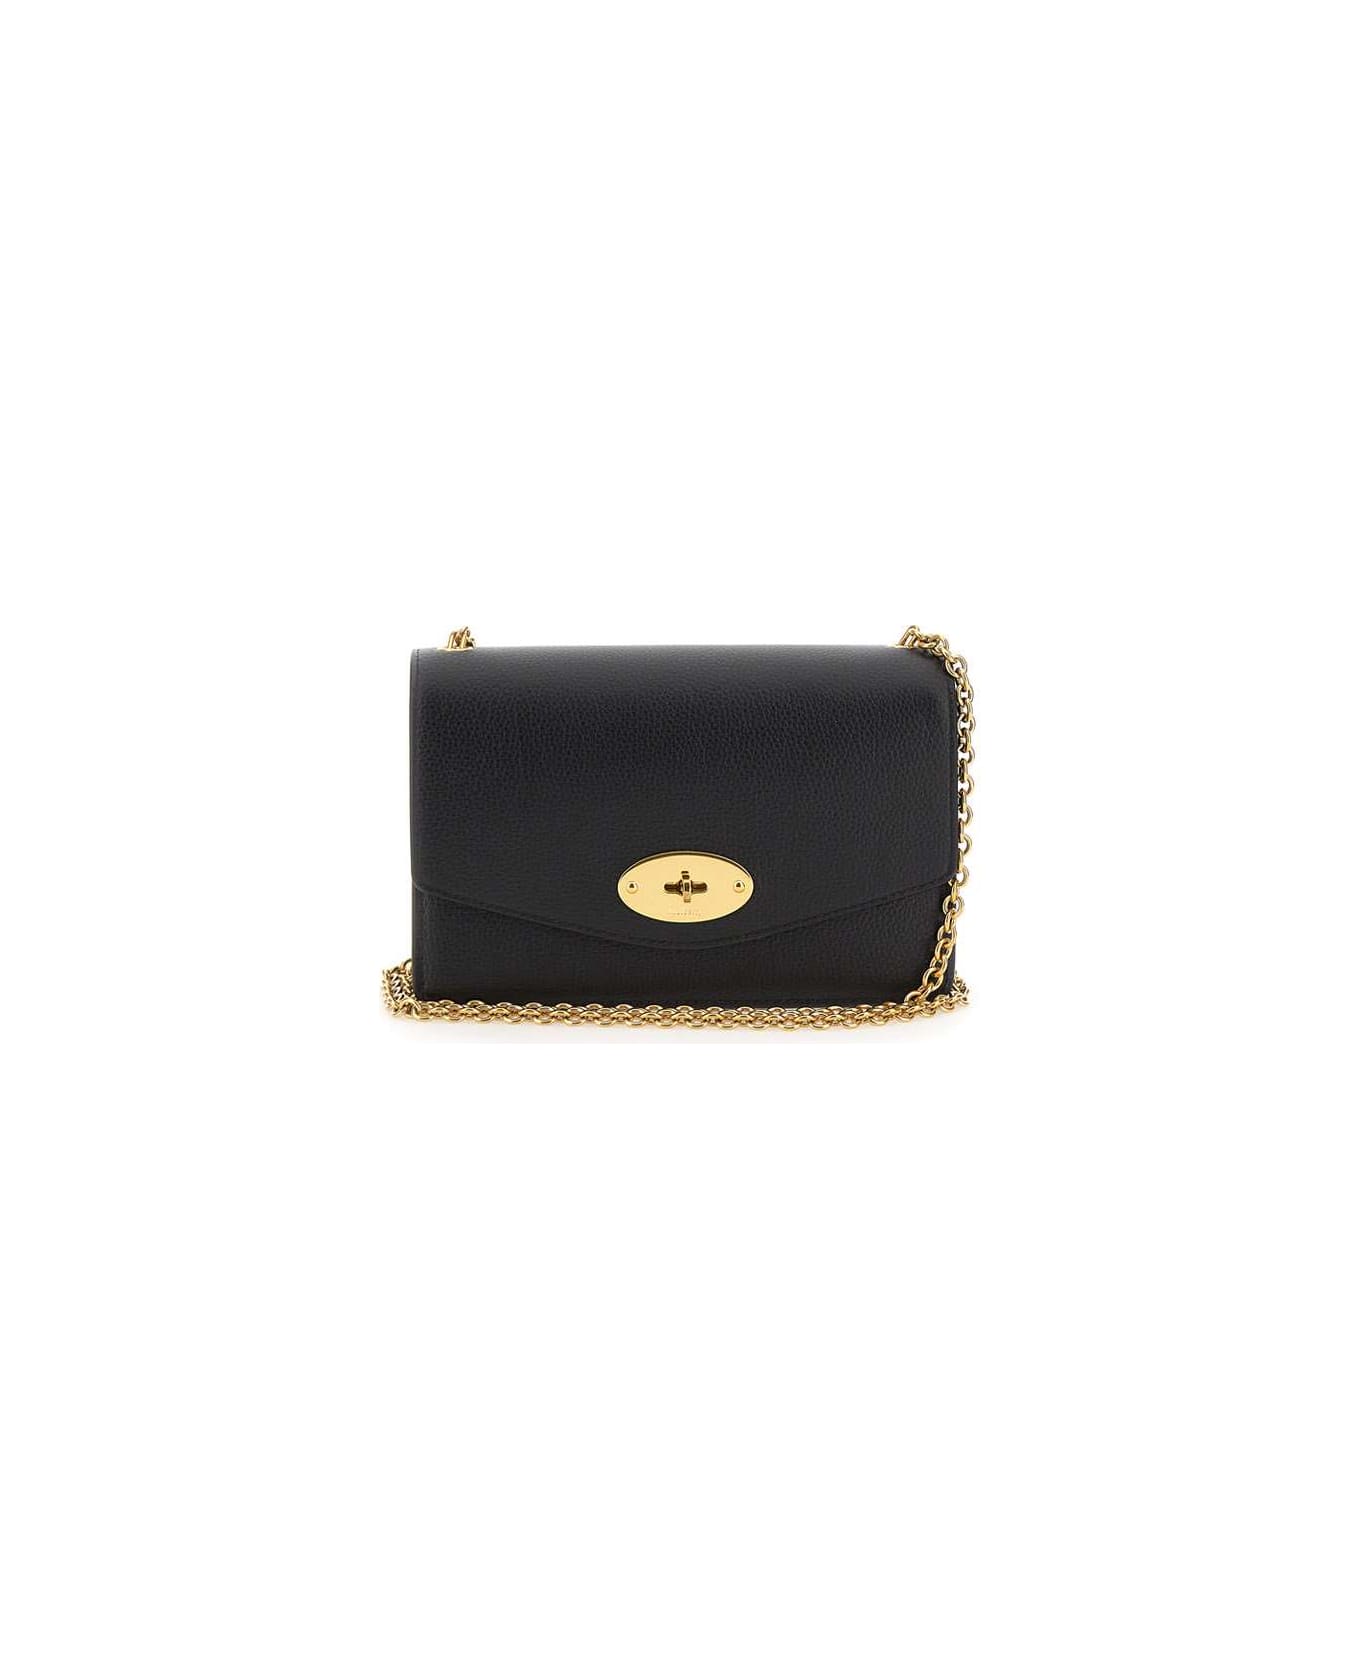 Mulberry 'small Darley' Leather Bag - Black